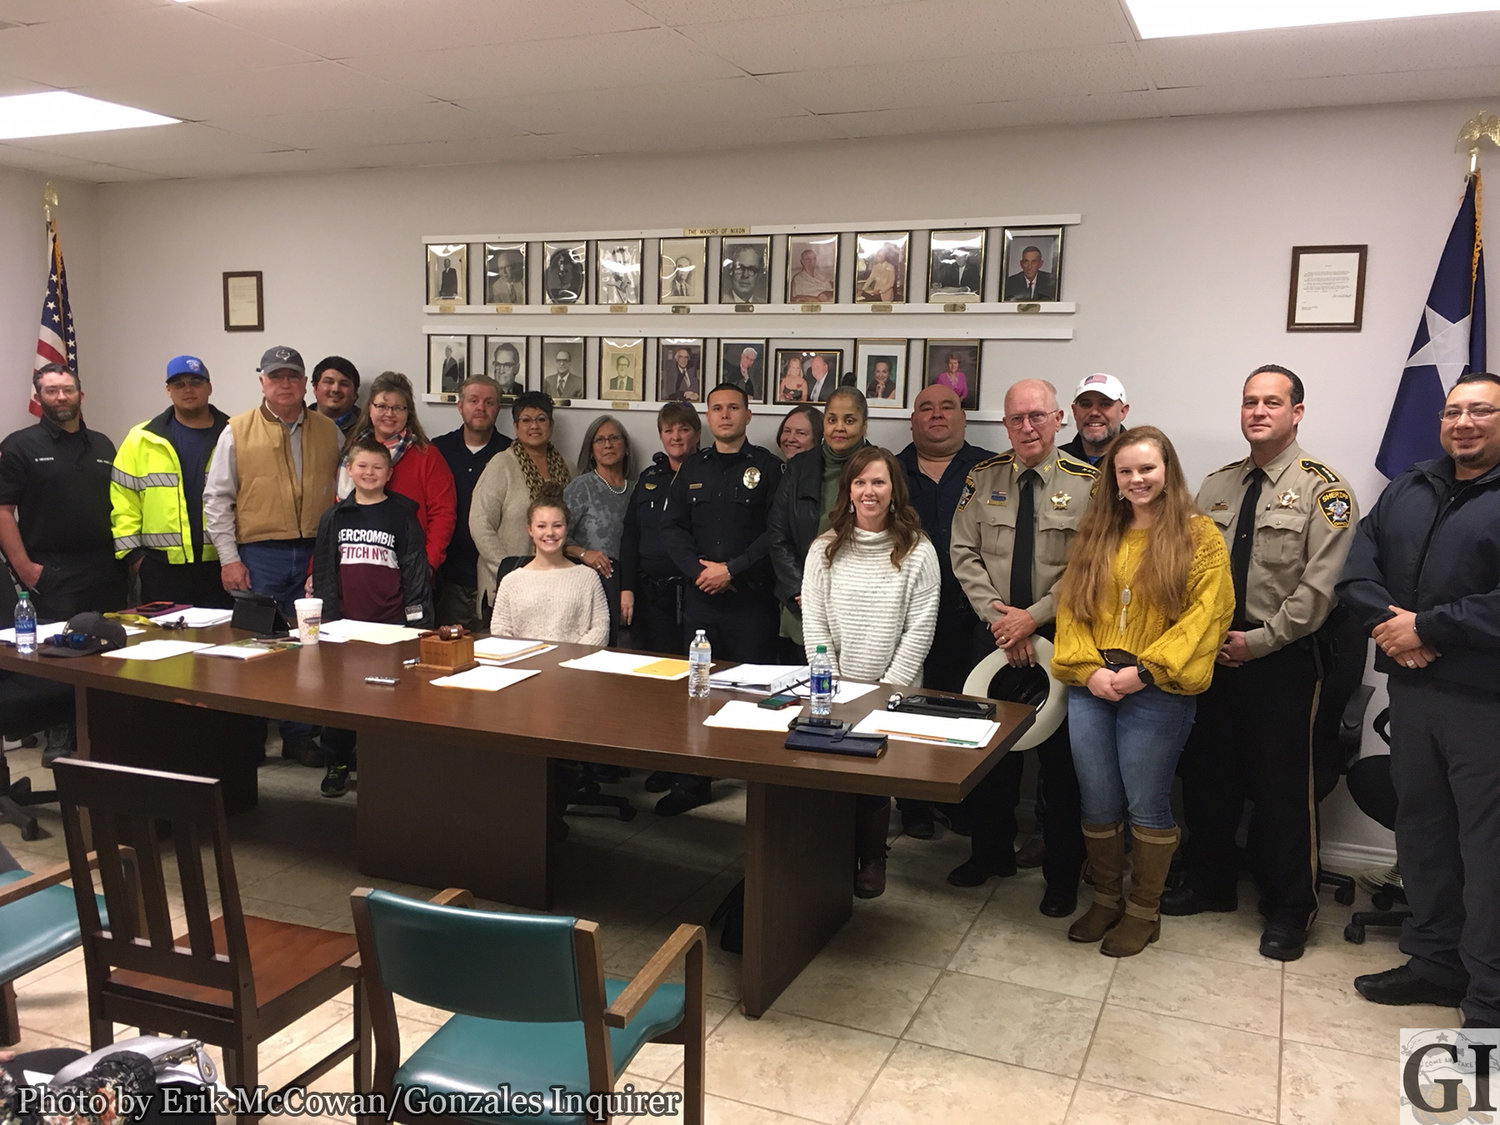 The City of Nixon issued a proclamation for Grace Morgan Day at their Monday night meeting. Morgan was the linchpin of a toy drive this past holiday season that brought gifts to children across the county who otherwise might have gone without. Here council, the Nixon Police Department, Gonzales County Sheriff's Department, Gonzales County EMS, and assorted officials took time to thank her for her efforts. Morgan is seated behind the gavel in the mayor's chair.